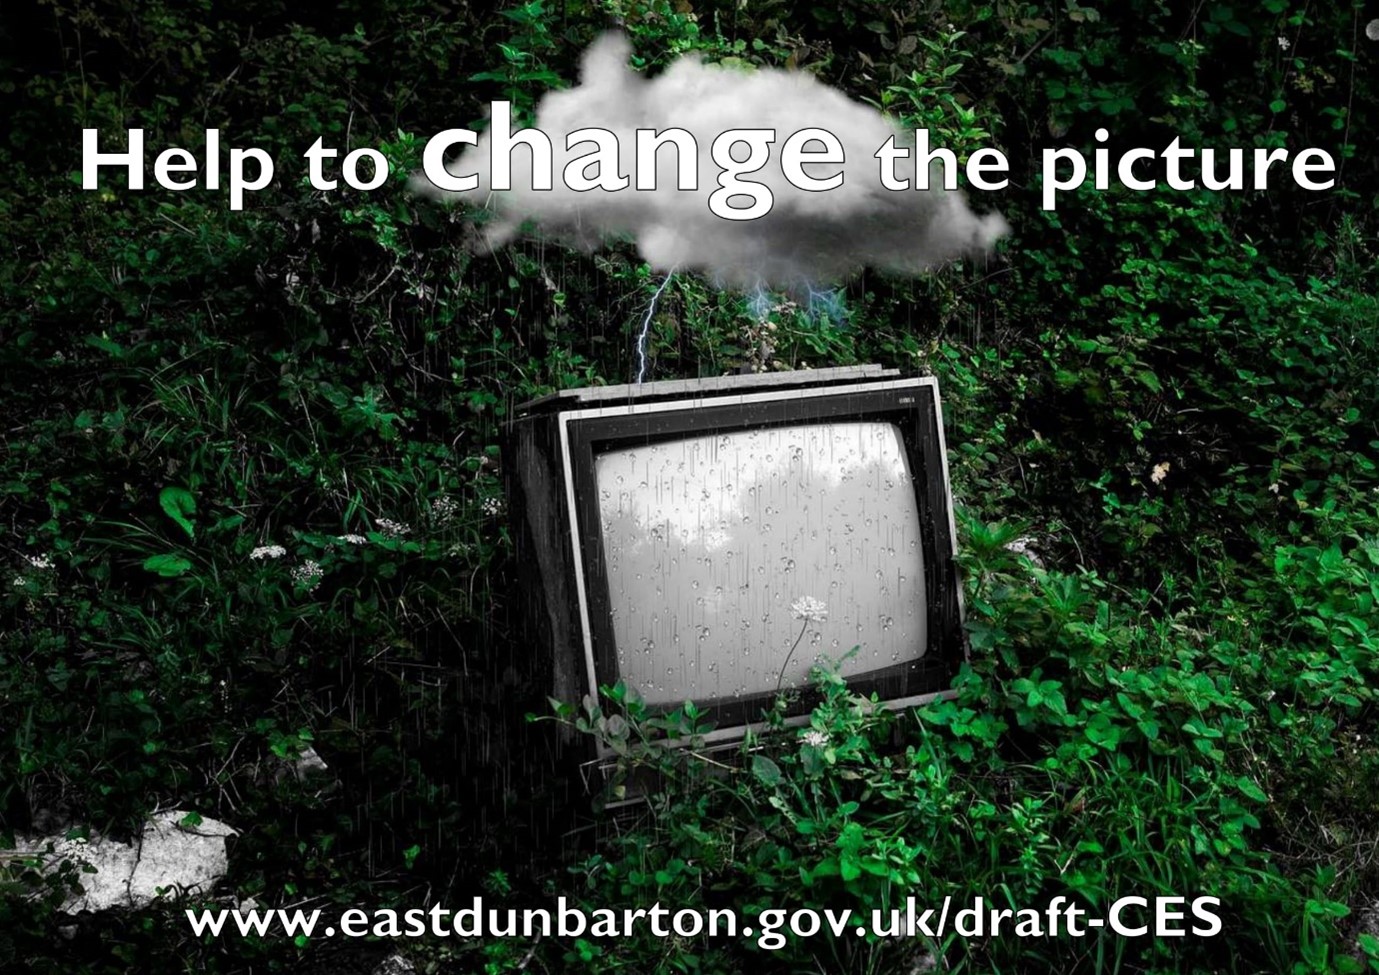 television sitting in a bush with the text 'help to change the picture'